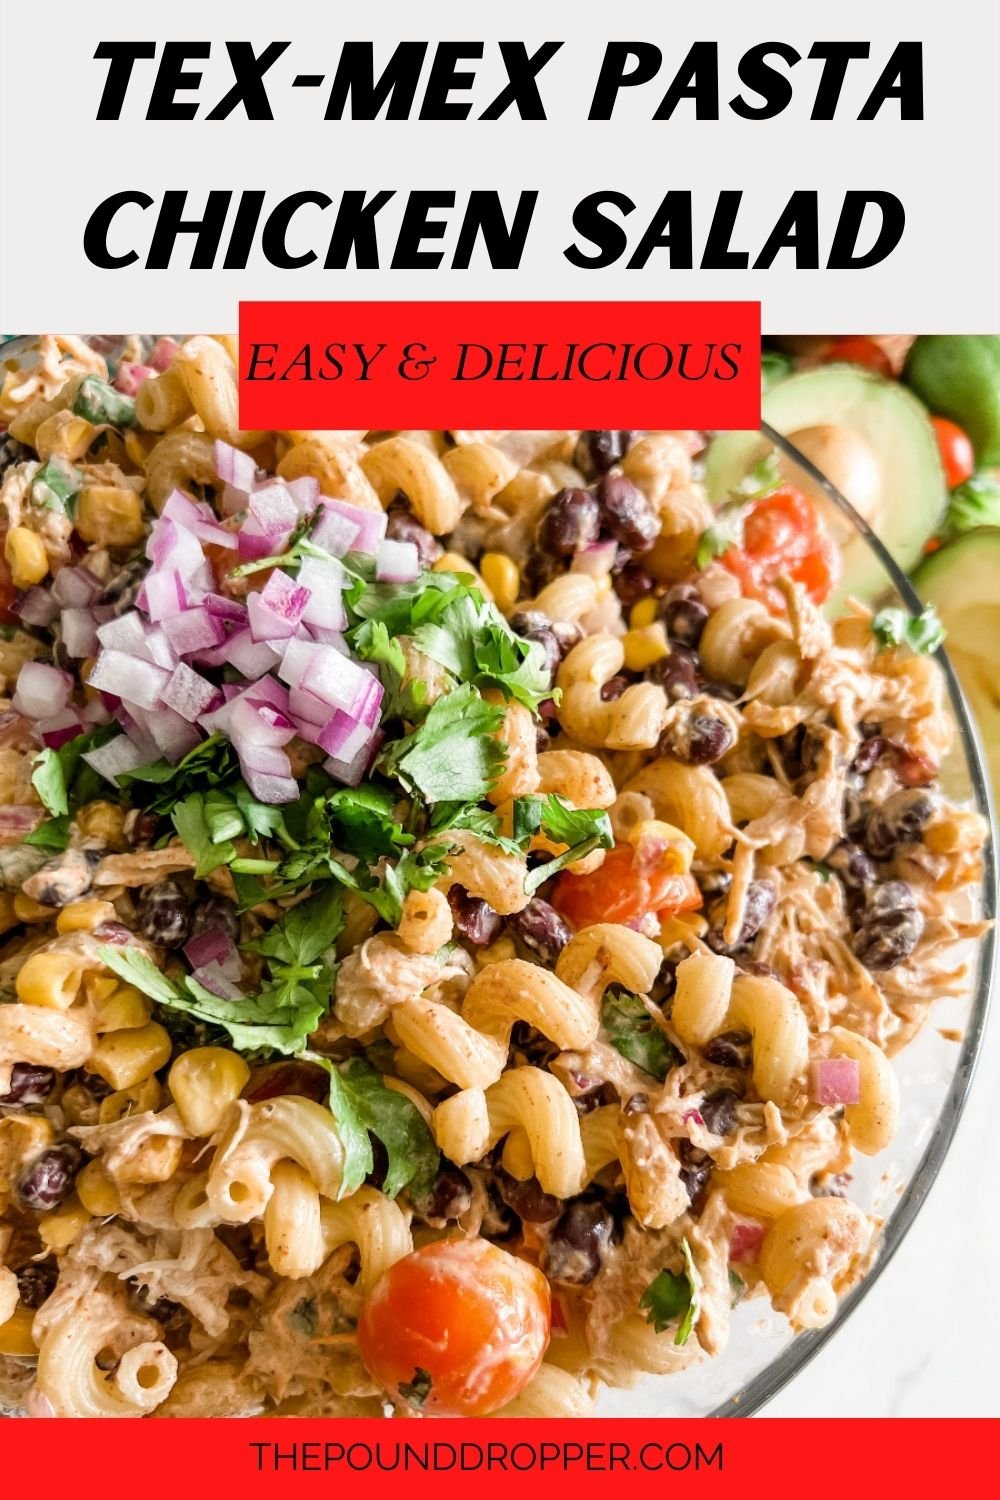 This Tex-Mex Pasta Chicken Salad  is an easy and delicious pasta salad packed with pasta, cooked chicken, black beans, corn, tomatoes, cilantro, red onion, and topped with a creamy, spicy, flavorful dressing. Perfect for your next BBQ or summer picnic! via @pounddropper